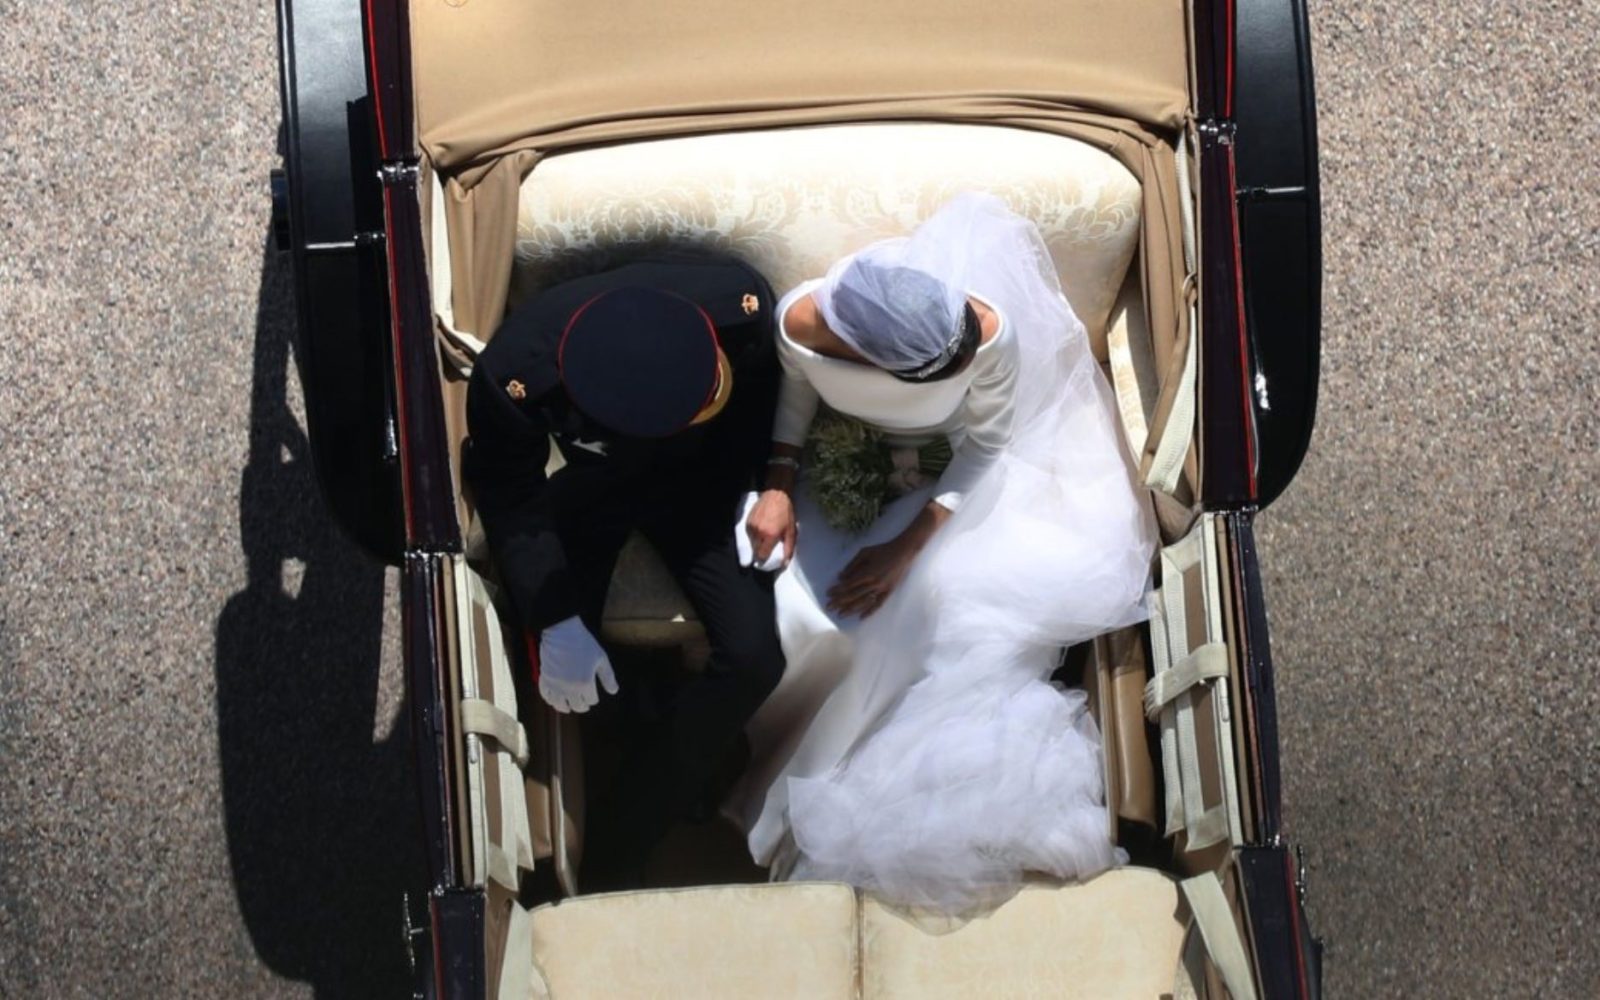 Drone detection systems, such as DJI's Aeroscope, protected the Royal Wedding in England